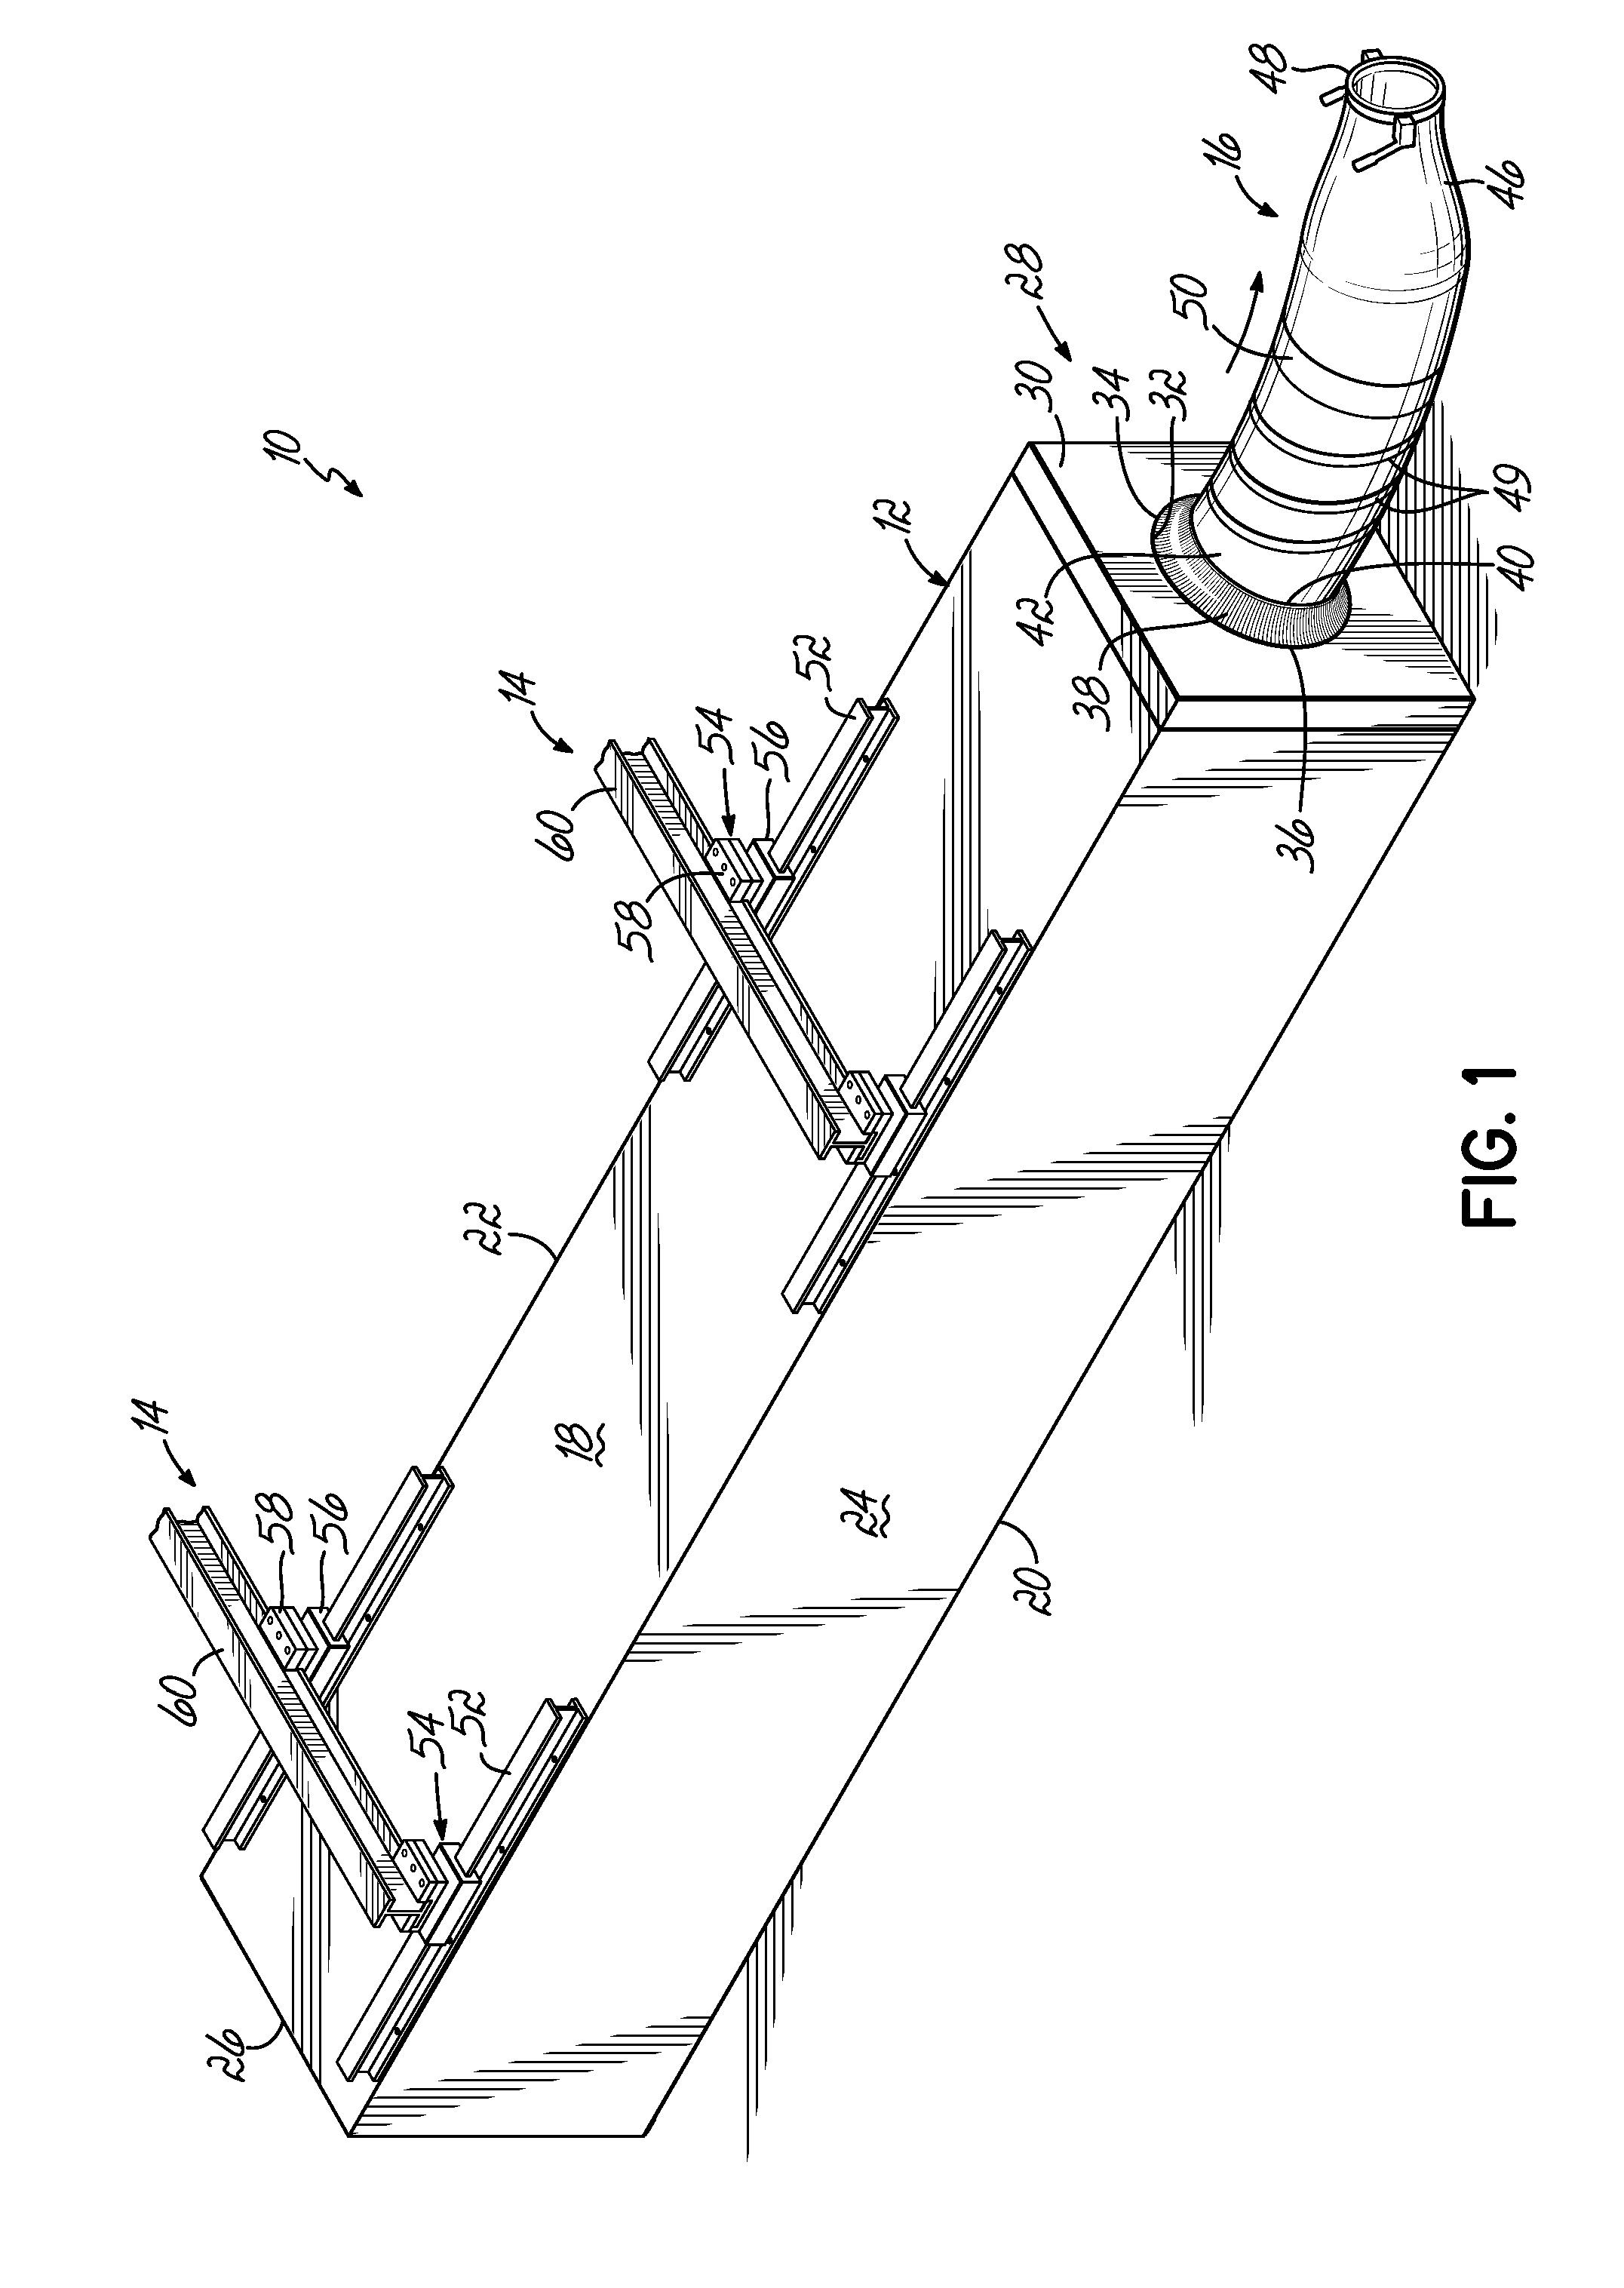 Hose Management System for Supplying Conditioned Air to an Aircraft